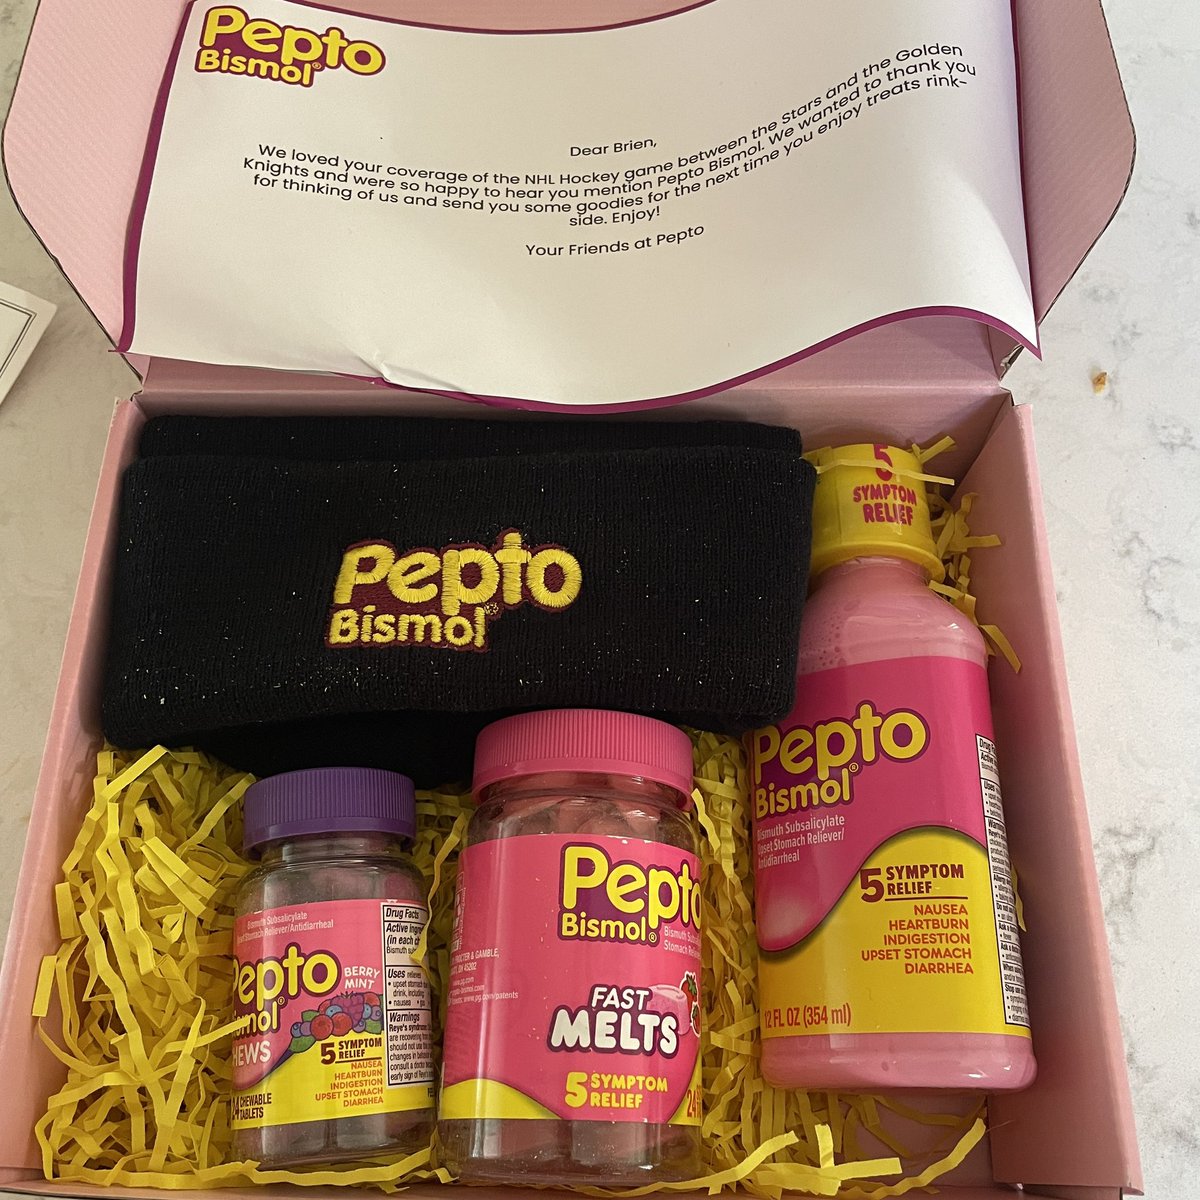 When you make an on-air joke during a #TexasHockey Game 7 in the Stanley Cup Playoffs… and @Pepto-Bismol hears about it 😂. 

Never had this on my Bingo card, but thanks for the care package. I guess this will help the nerves for the rest of the playoff run… 😂😂